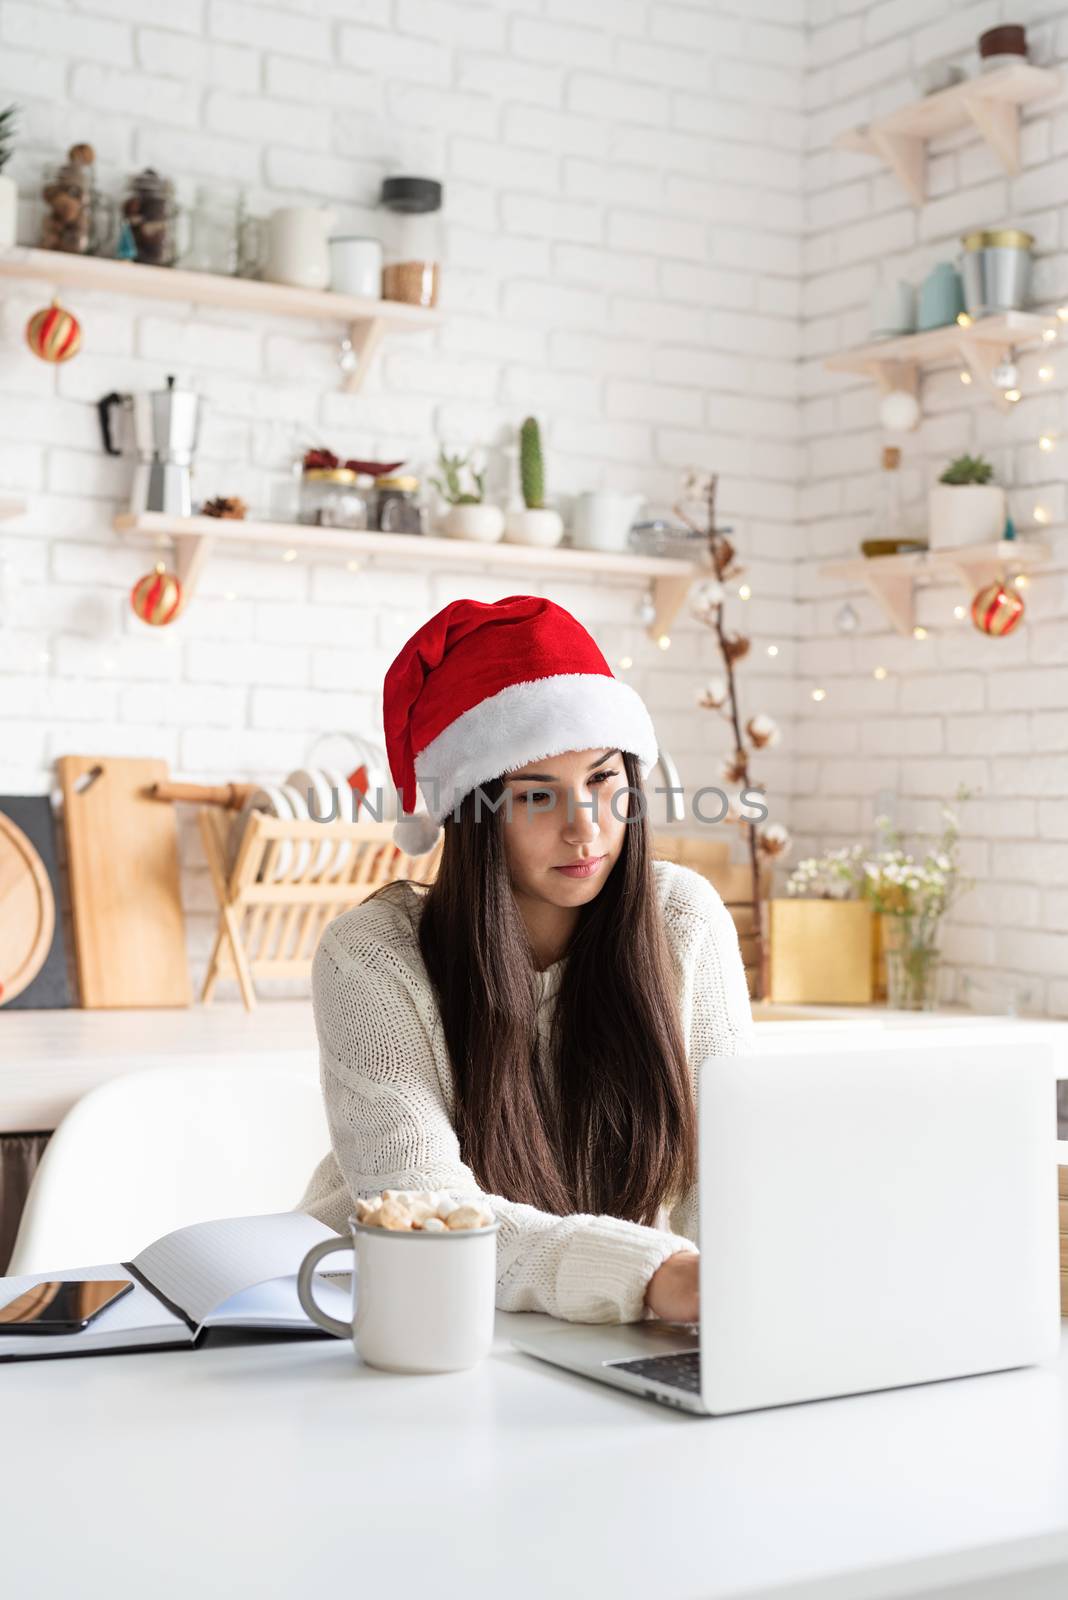 Merry Christmas and Happy New Year. Young brunette woman in santa hat chatting with friends using her laptop at the kitchen